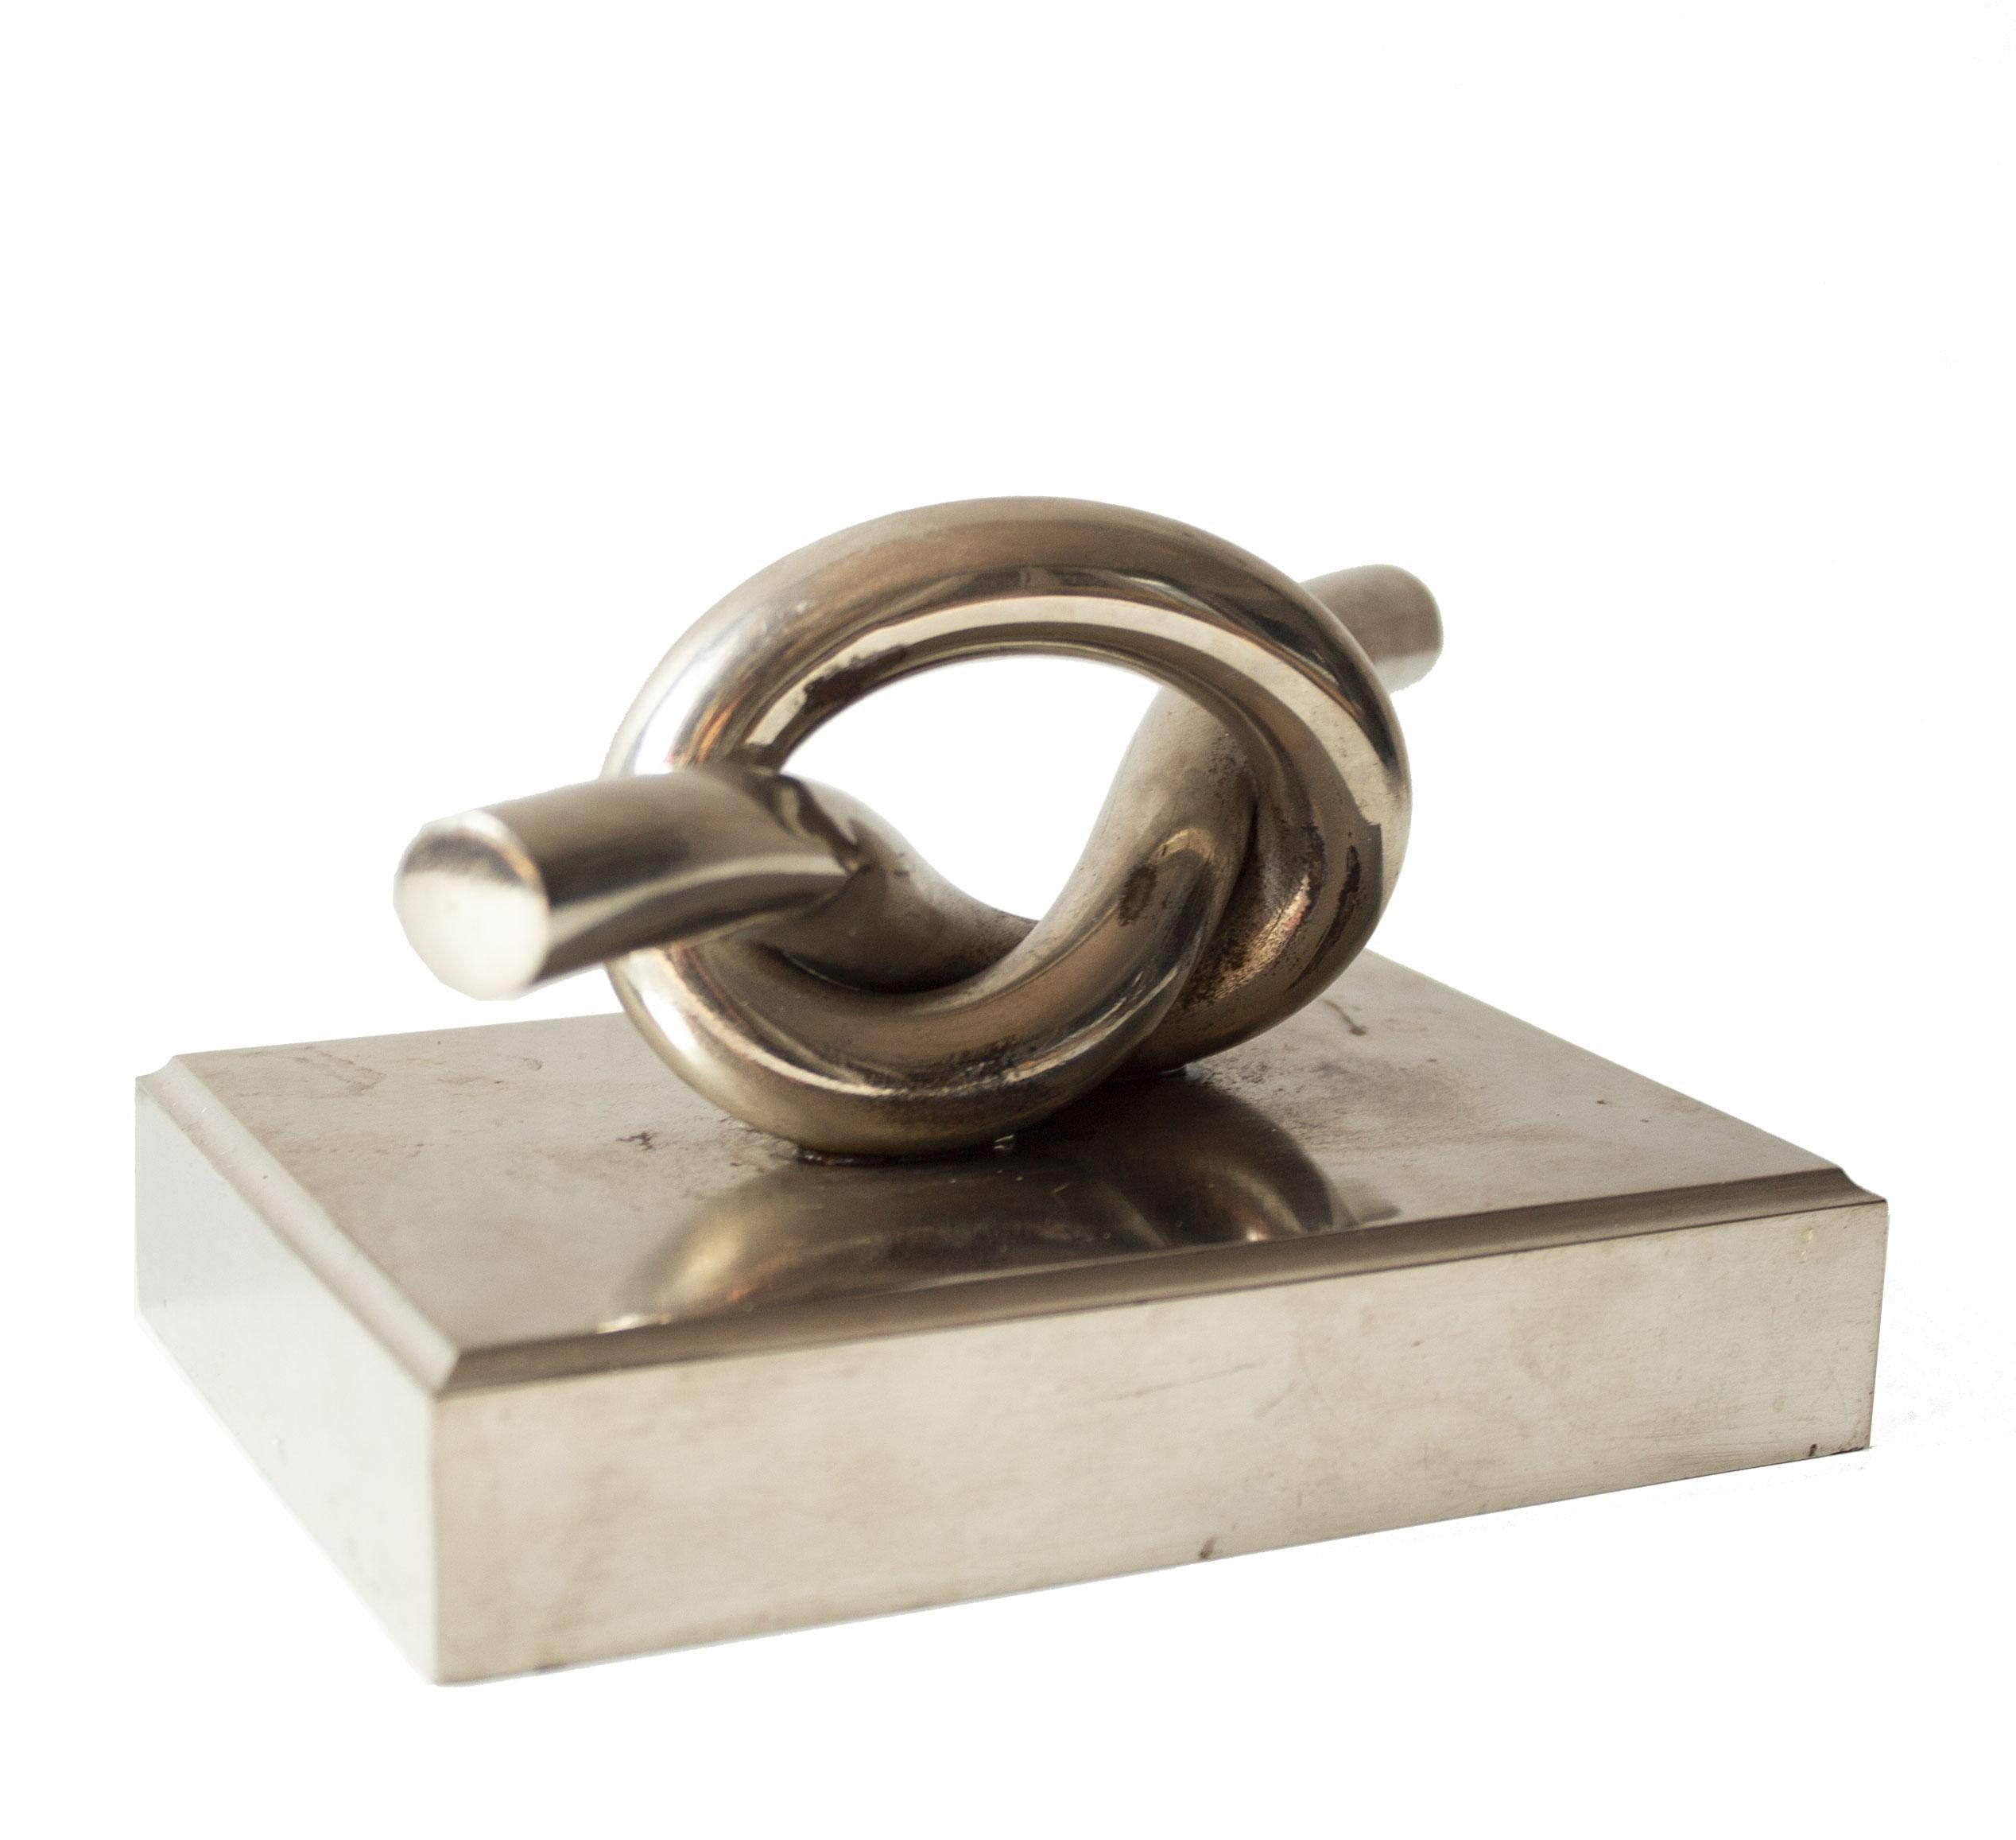 Knot Modernist Paperweight/sculpture in stainless steel and lead. Vintage sculpture from the 1970s on your desk to impress.